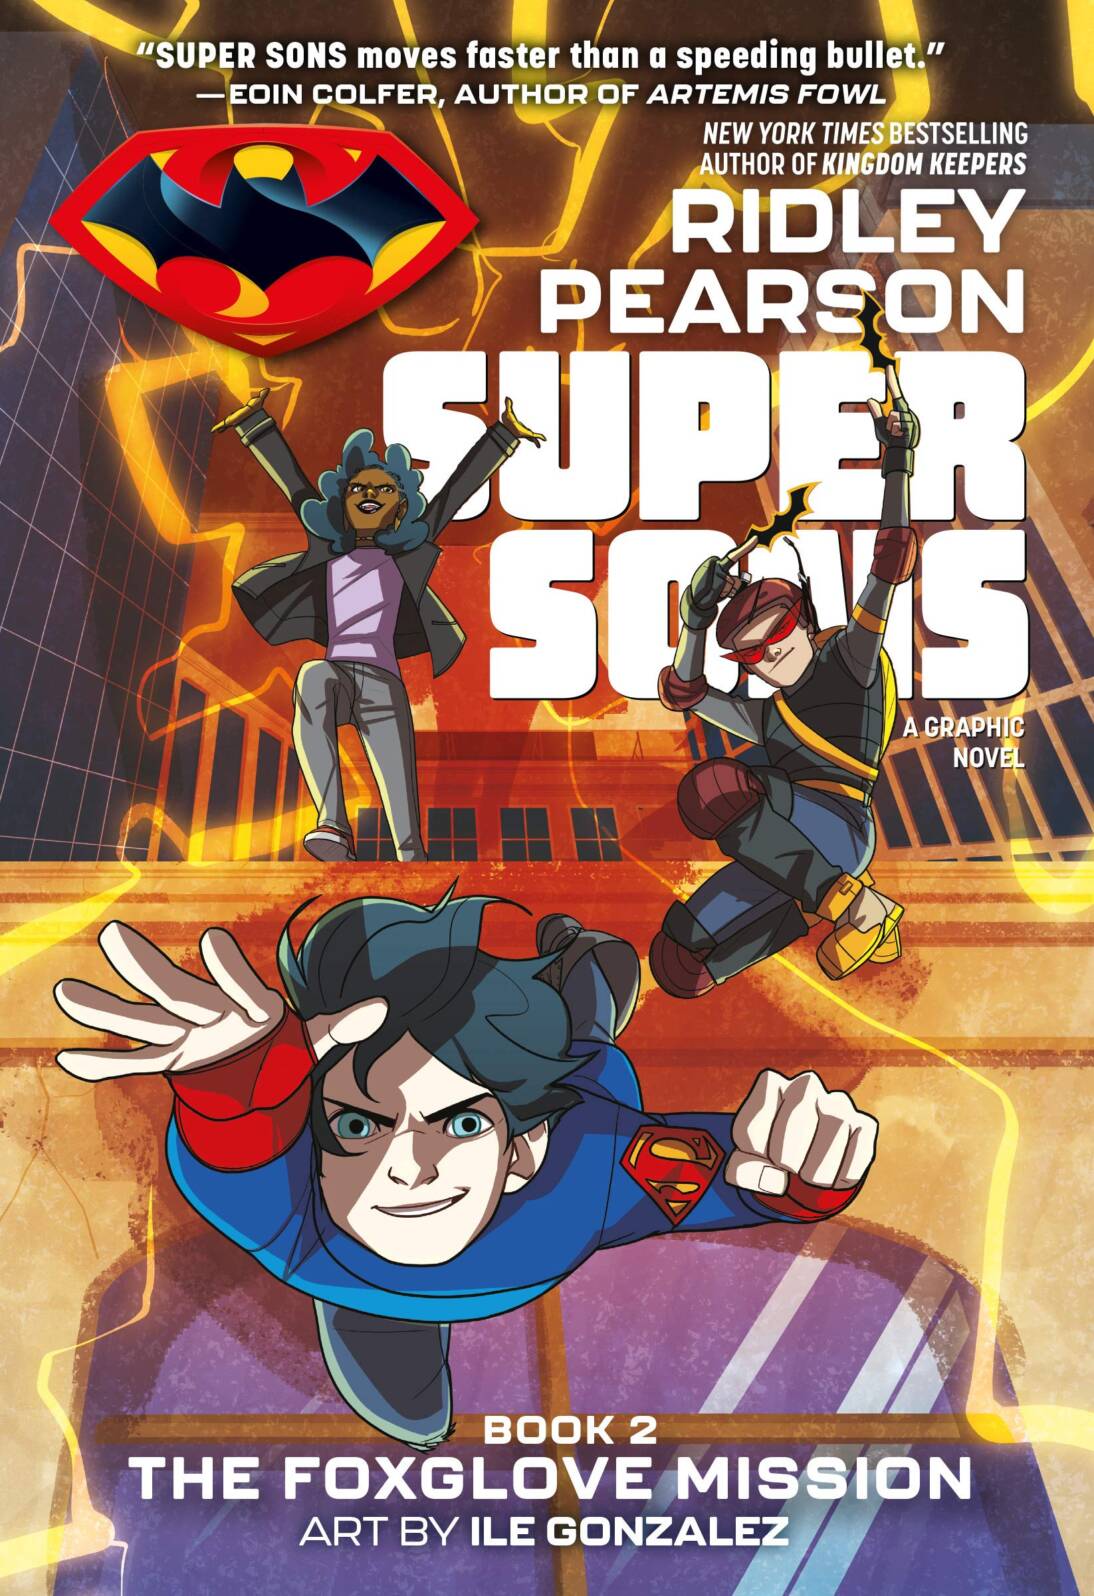 Book 2 Super Sons: The Foxglove Mission (Graphic Novel Review)